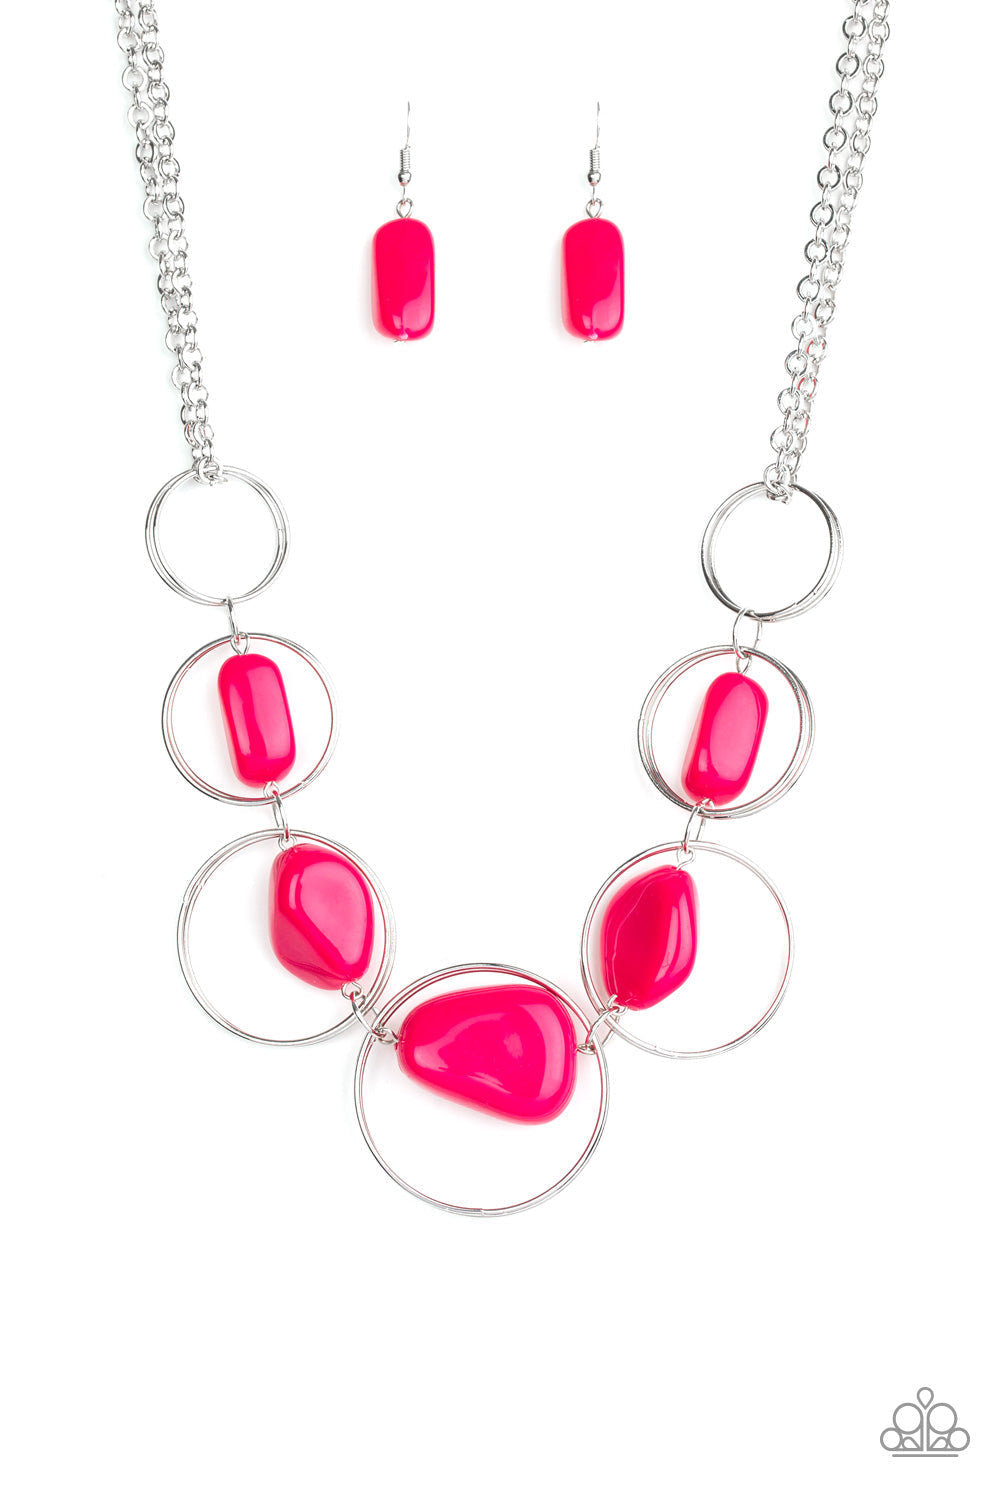 Travel Log - Pink and Silver Fashion Necklace - Paparazzi Accessories - Faux pink rock beads, silver hoops gradually increase in size as they link below the collar for a trendy fashion necklace. Bejeweled Accessories By Kristie - Trendy fashion jewelry for everyone -